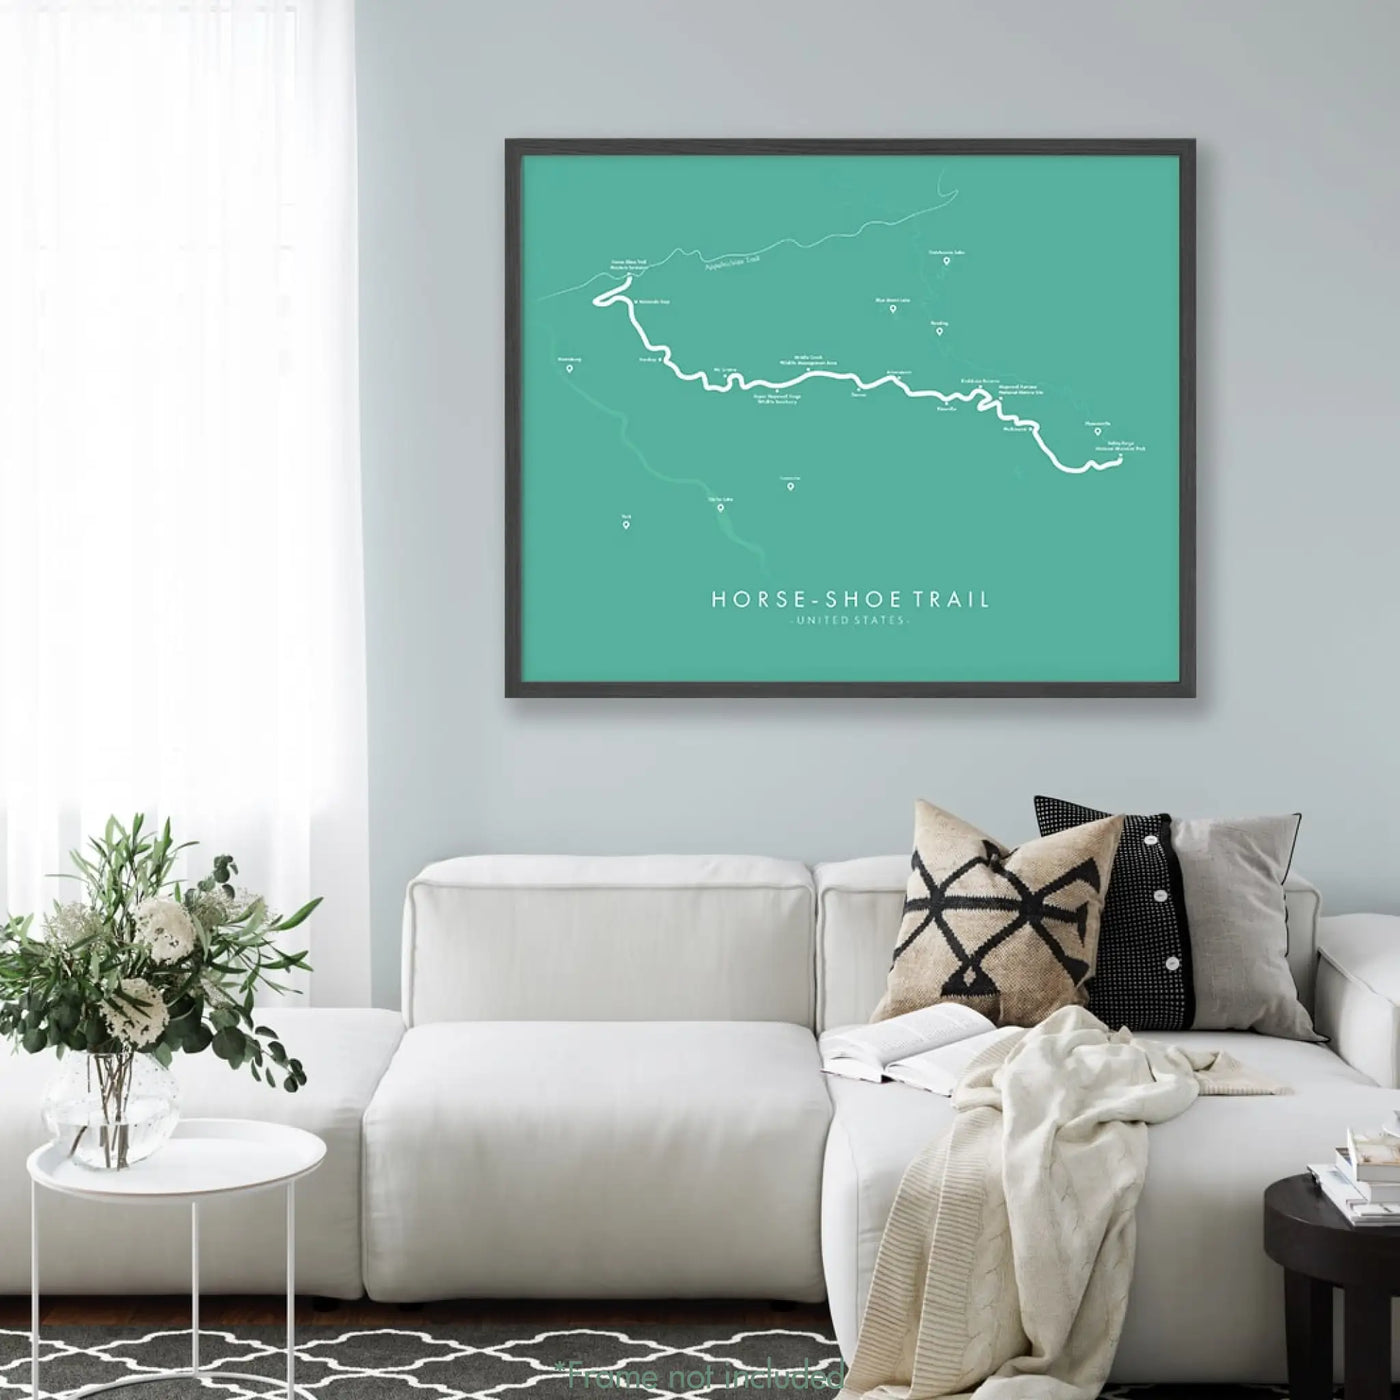 Trail Poster of Horse-Shoe Trail - Teal Mockup